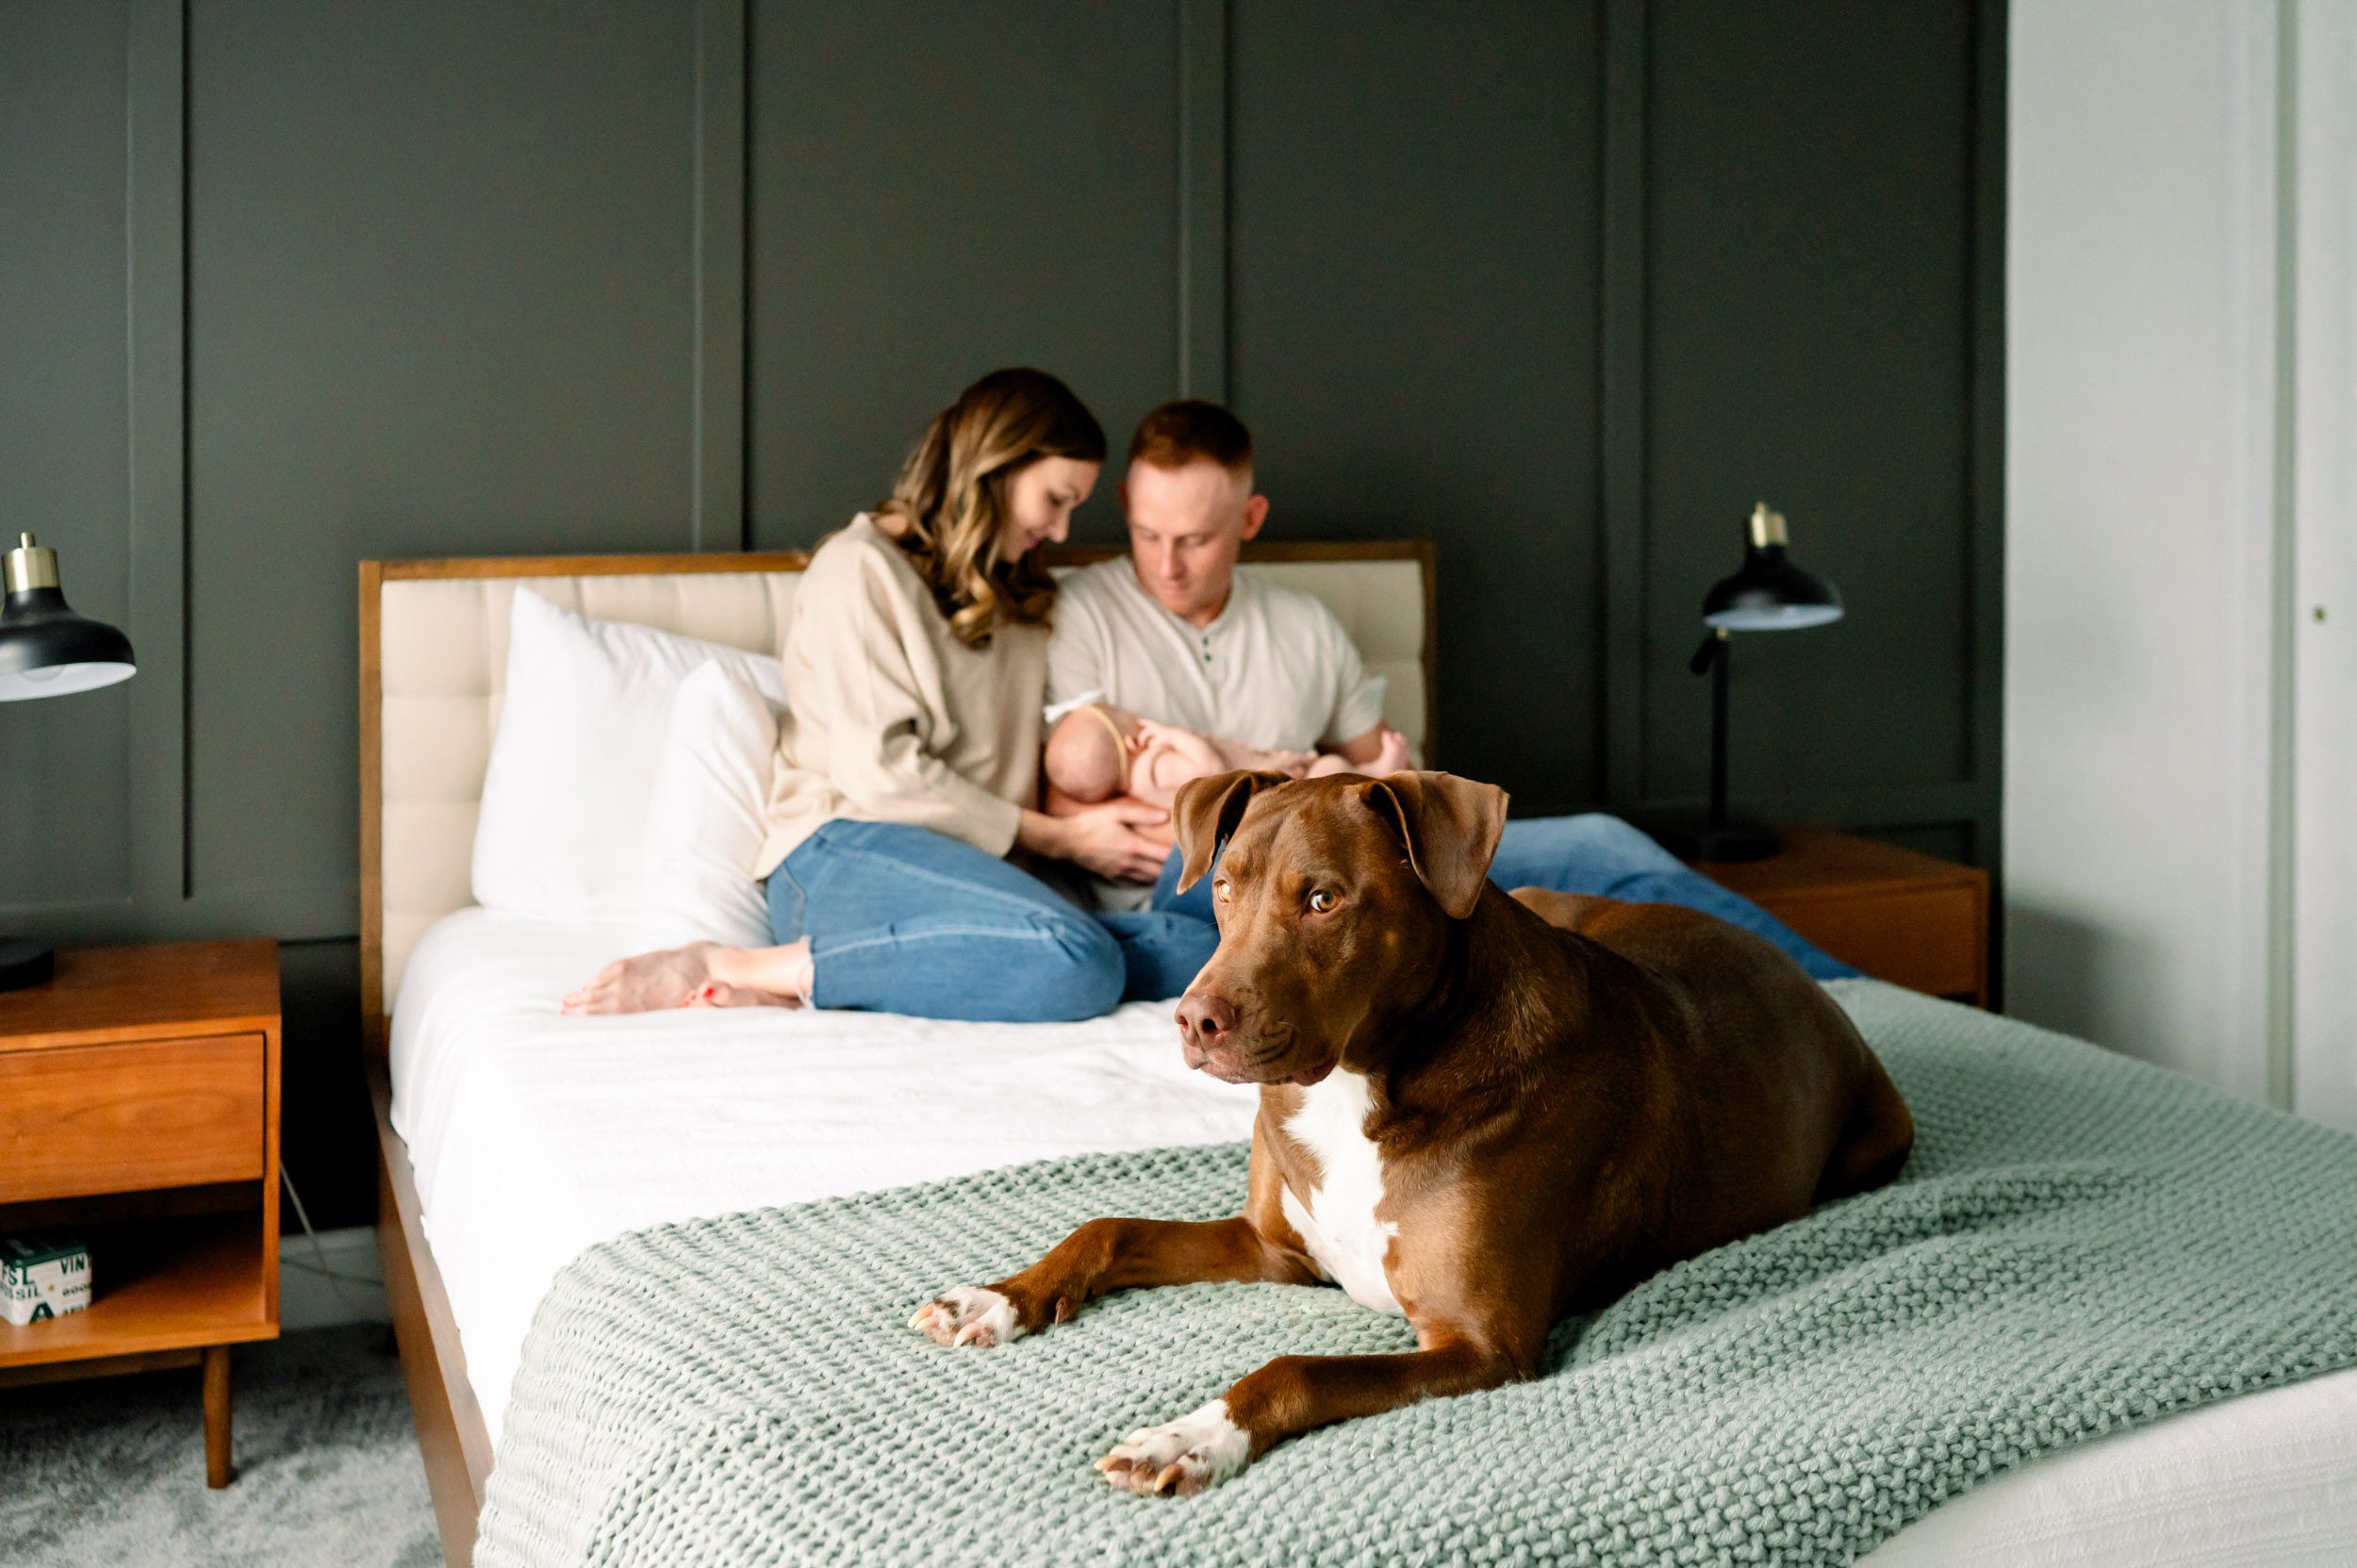 new parents sitting on a bed and smiling down at their baby girl cradled in their arms with the family dog in the foreground looking right at the camera during an in home newborn photography session